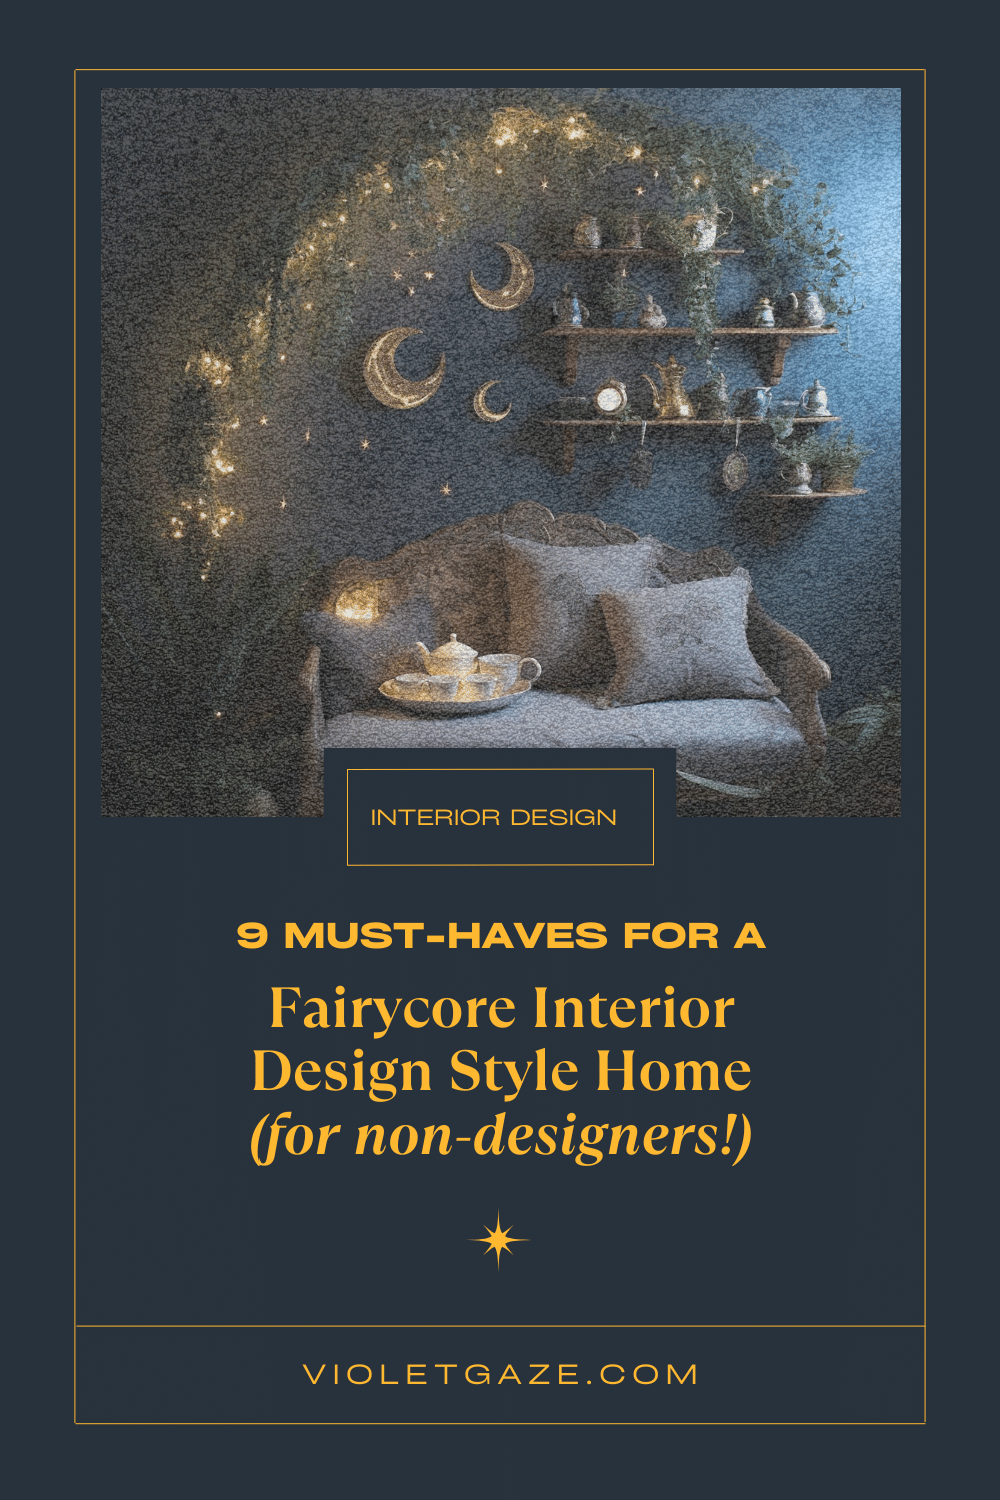 9 must-haves for a fairycore interior design style home